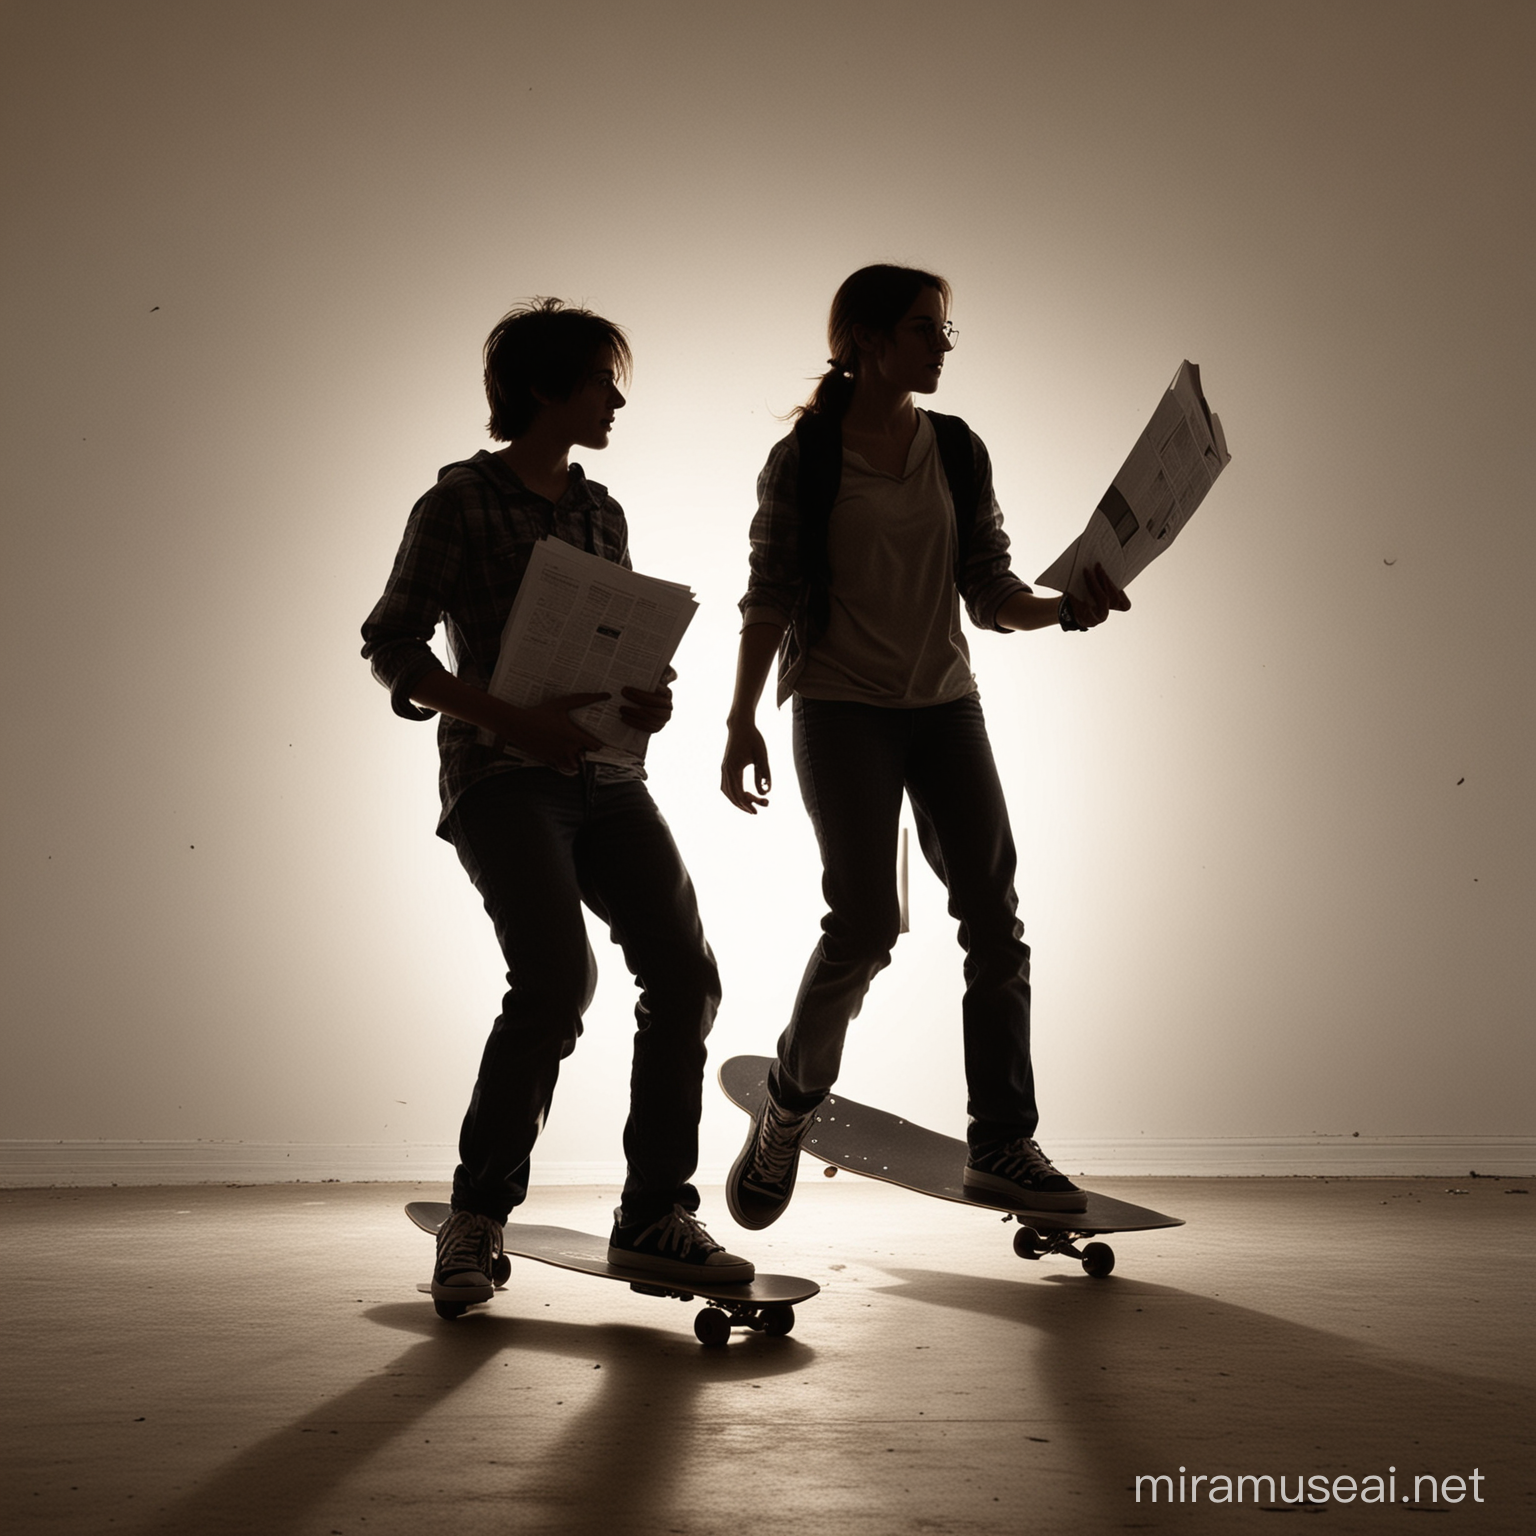 Silhouette of High School Freshman Skateboarding with MiddleAged Woman Chasing Him